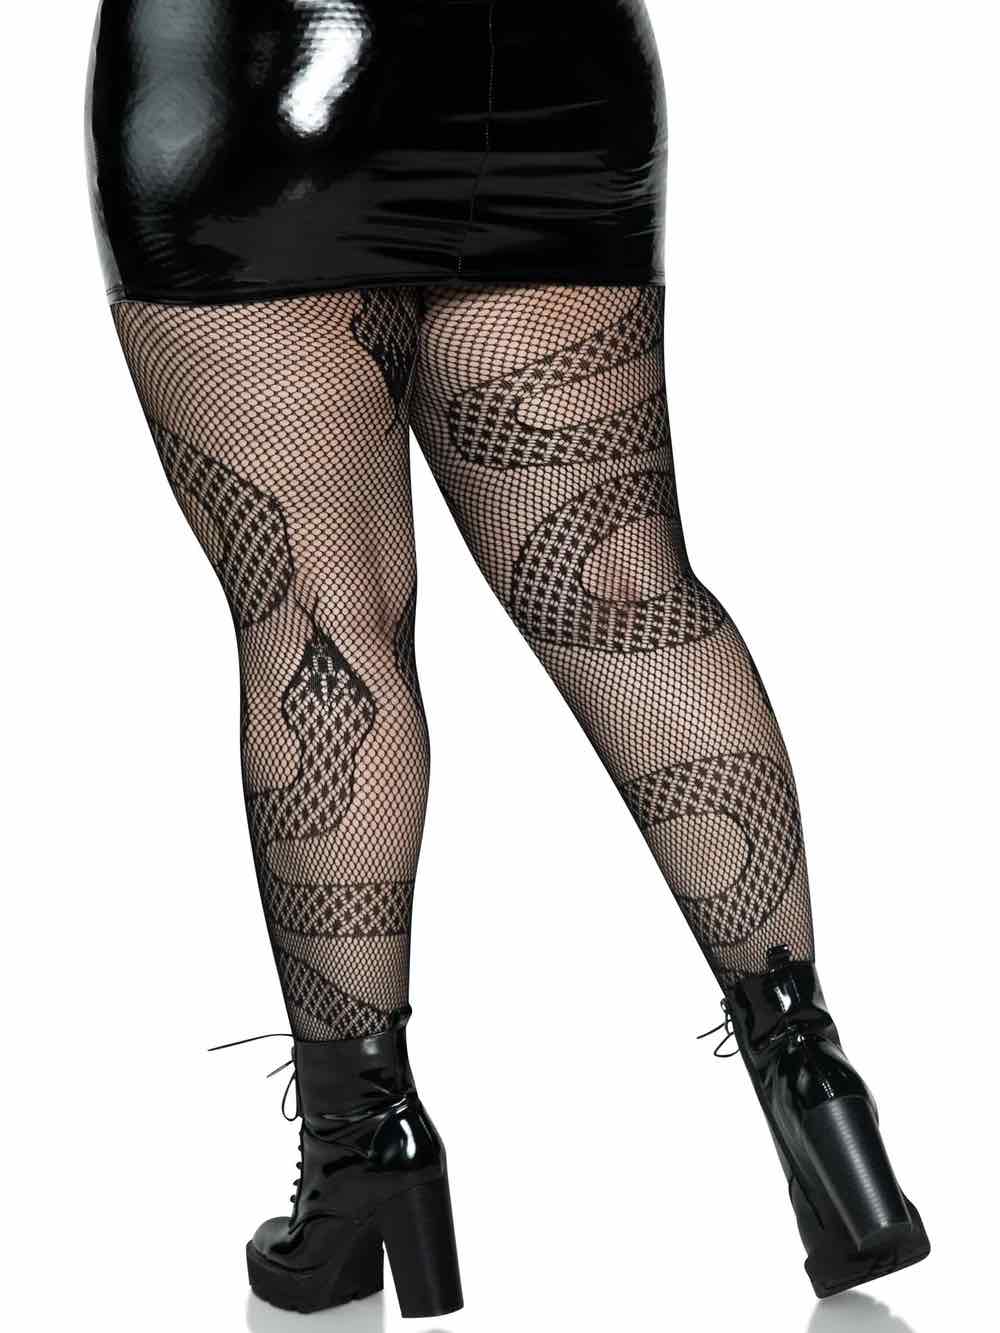 A plus size model wearing the Snake Net Tights with black wetlook skirt and platform boots, rear view.